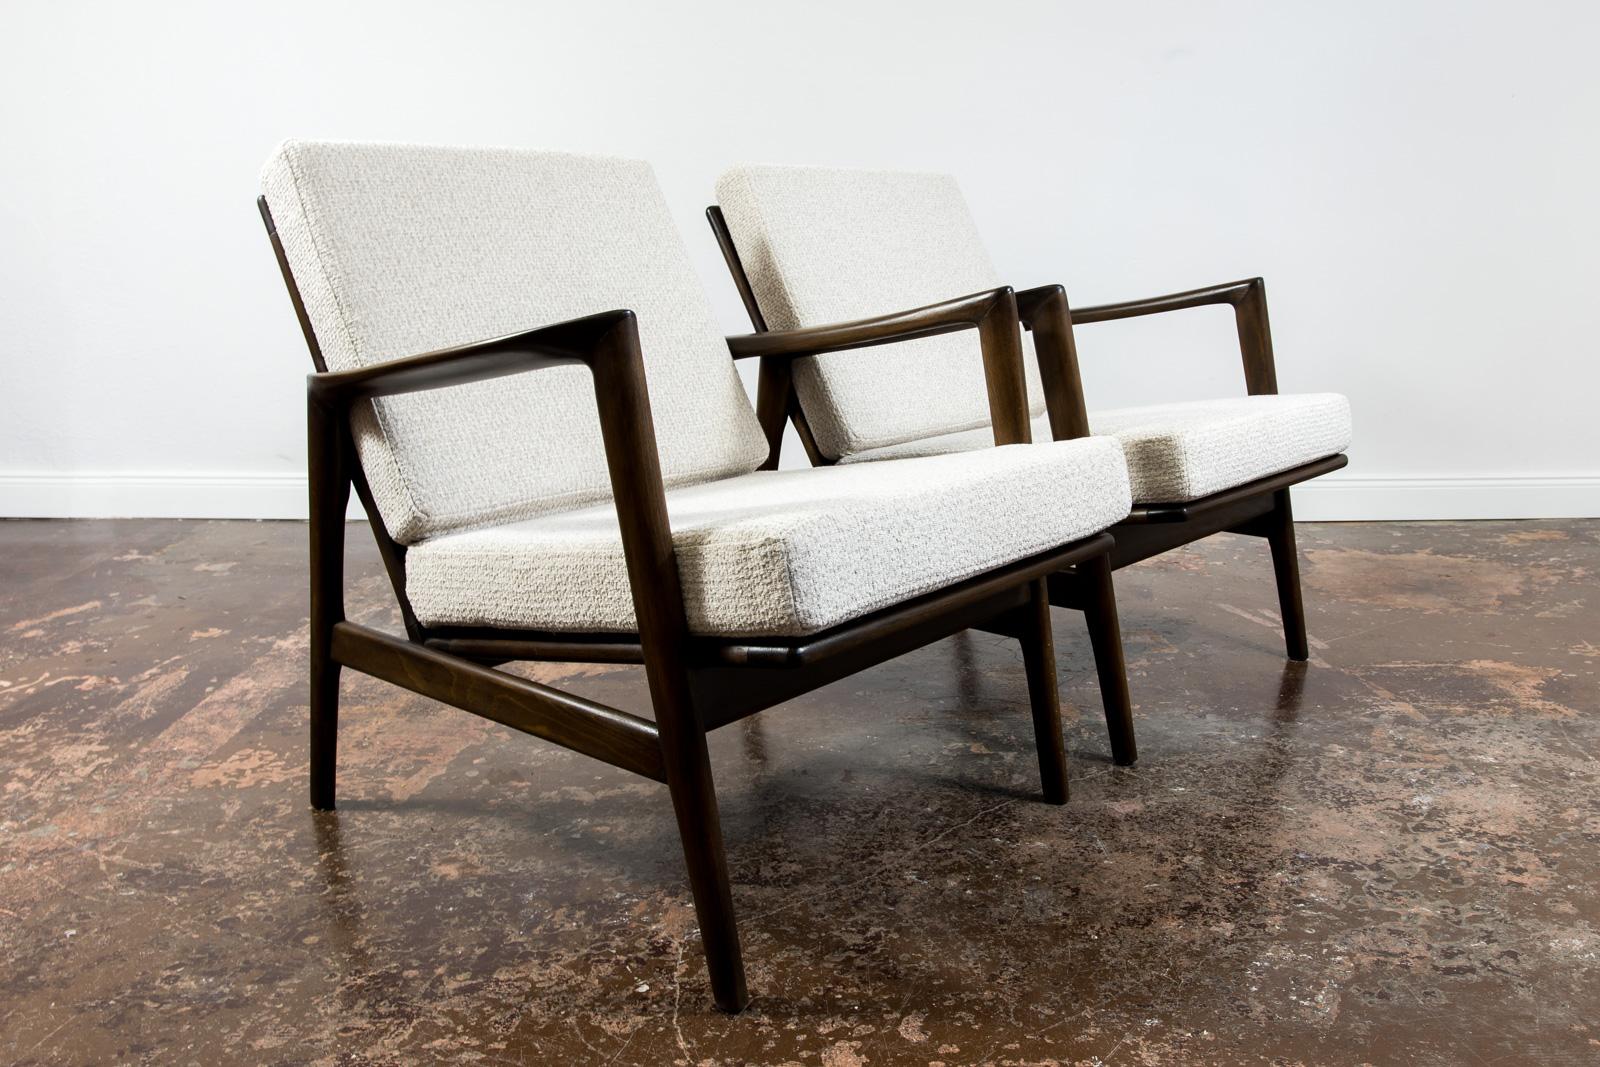 Customizable Pair of Mid Century Modern Armchairs Type 300-130, 1960s, Poland For Sale 3